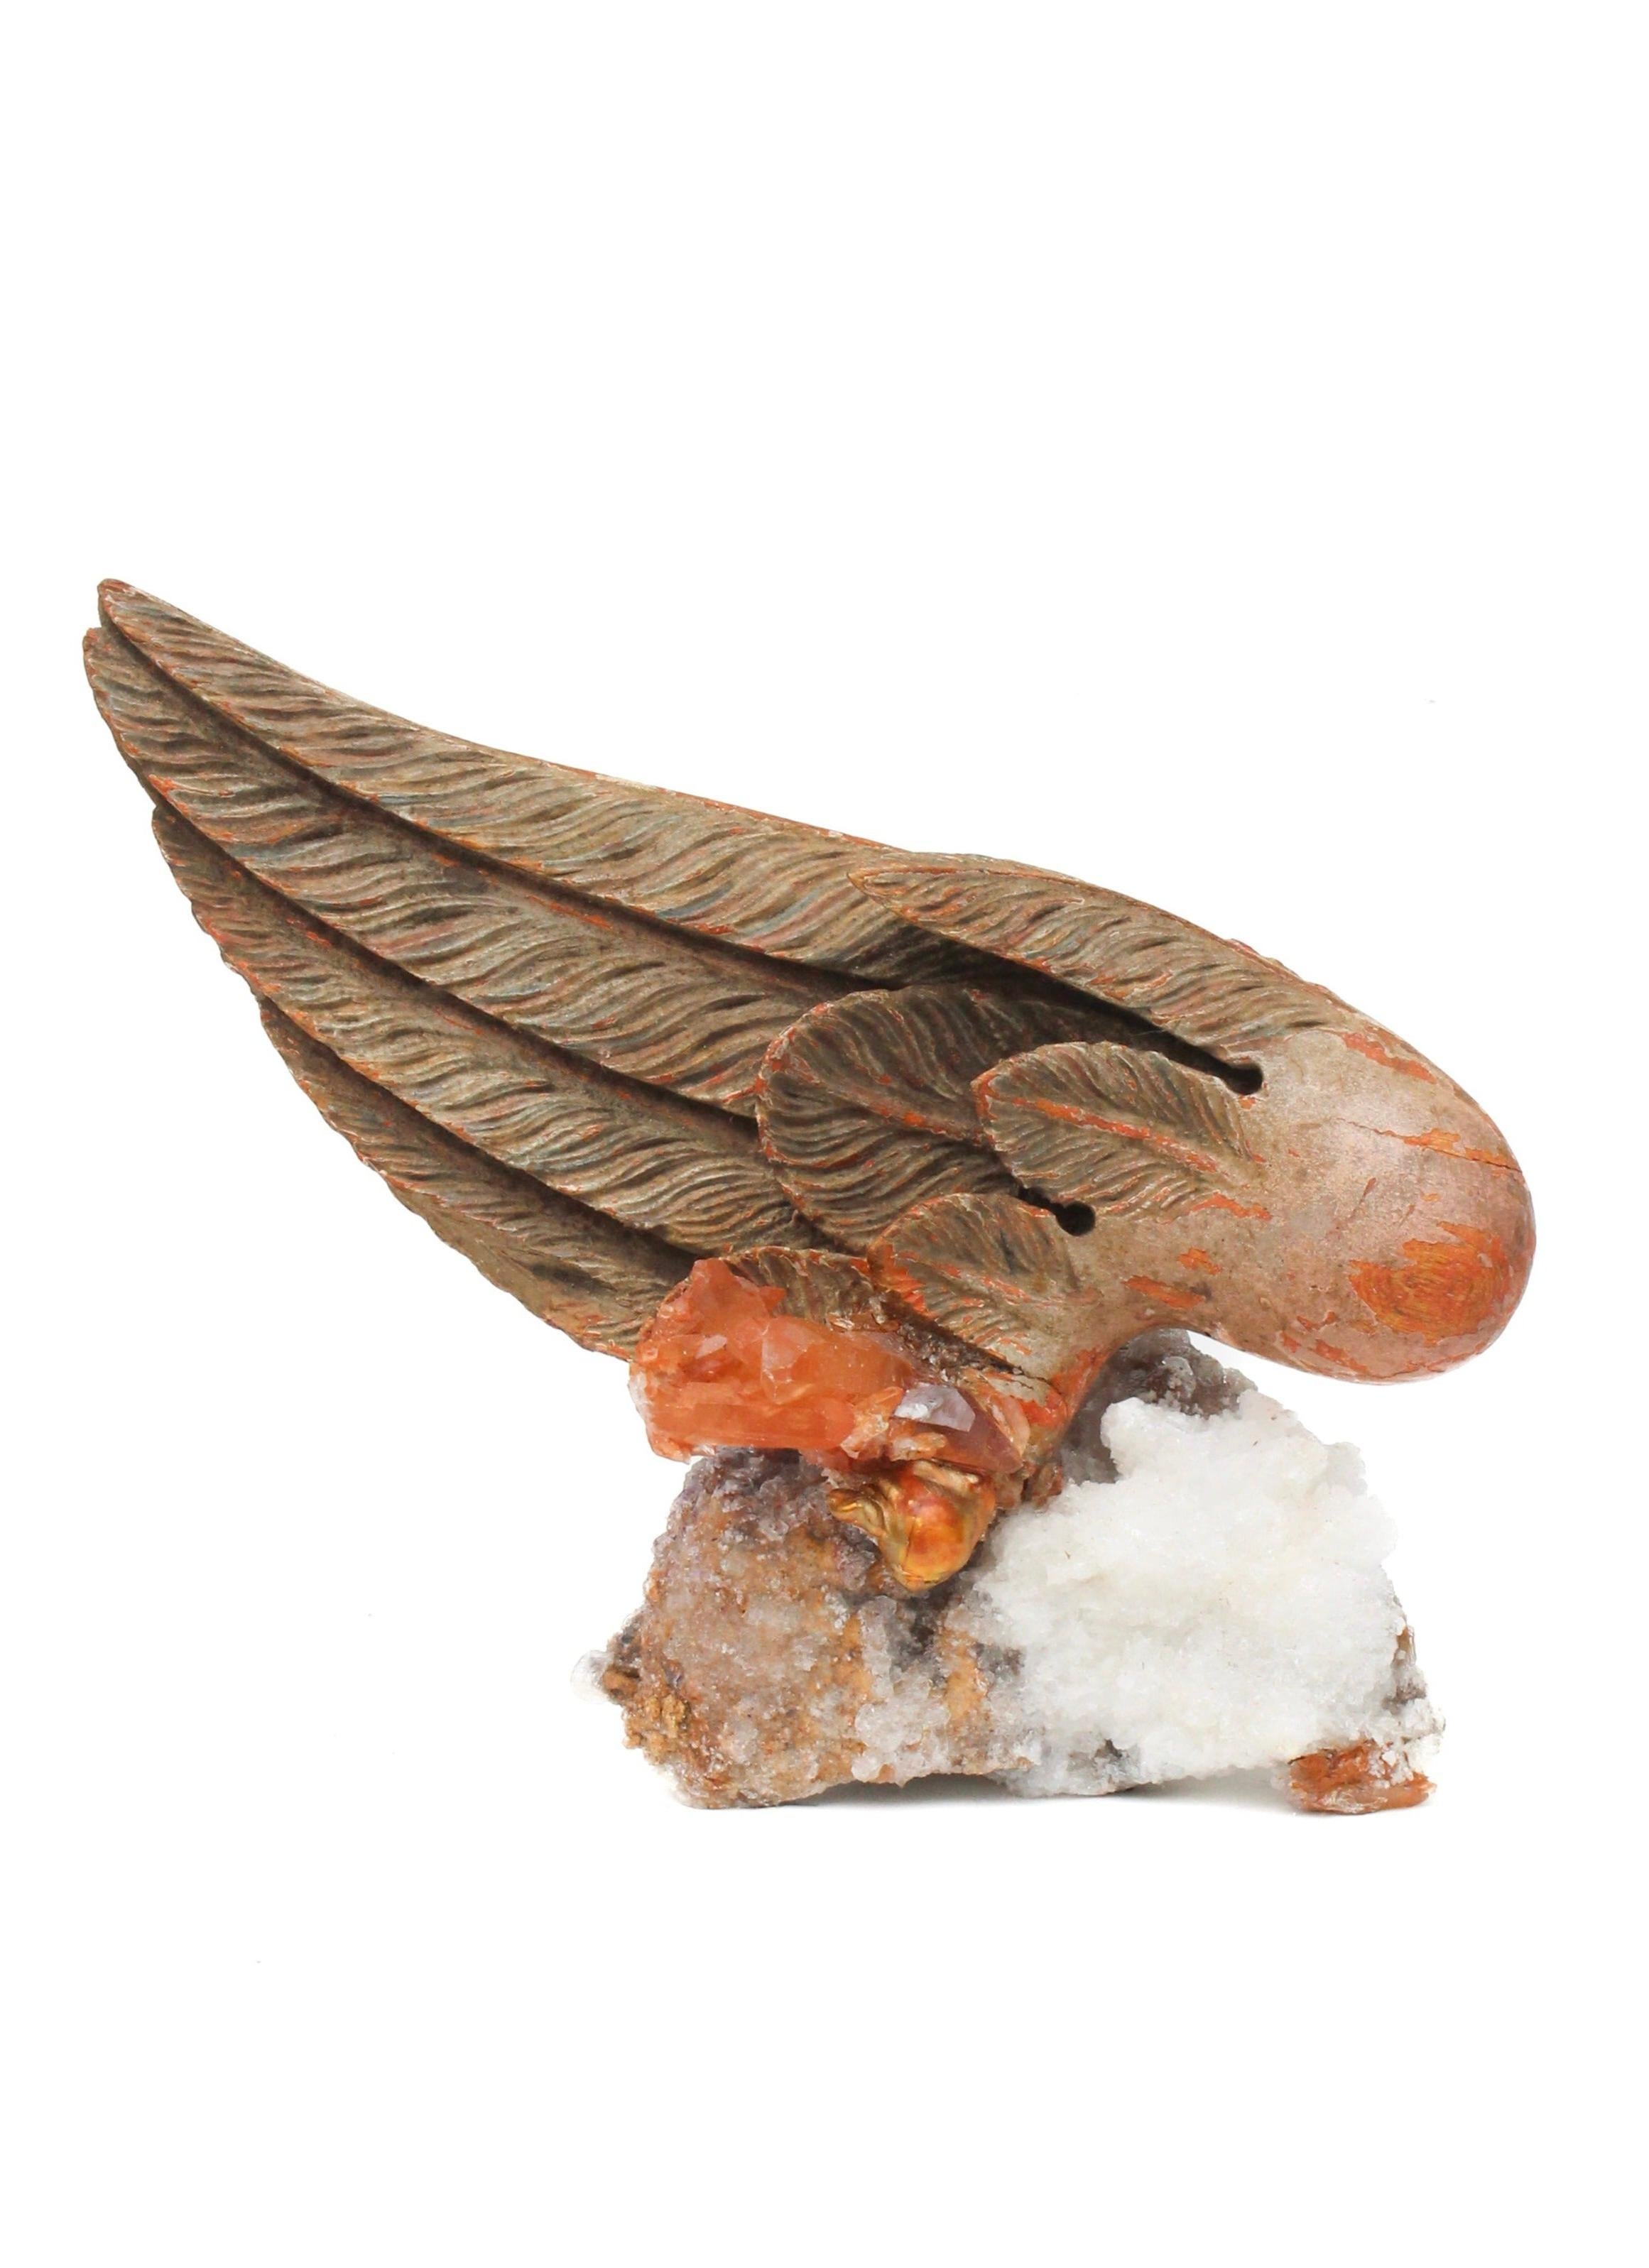 Sculptural 18th century Italian hand-carved angel wing mounted on aragonite and adorned with tangerine quartz crystals and a baroque pearl. 

The hand-carved angel wing was once part of a heavenly, angelic depiction in a historic church in Italy.